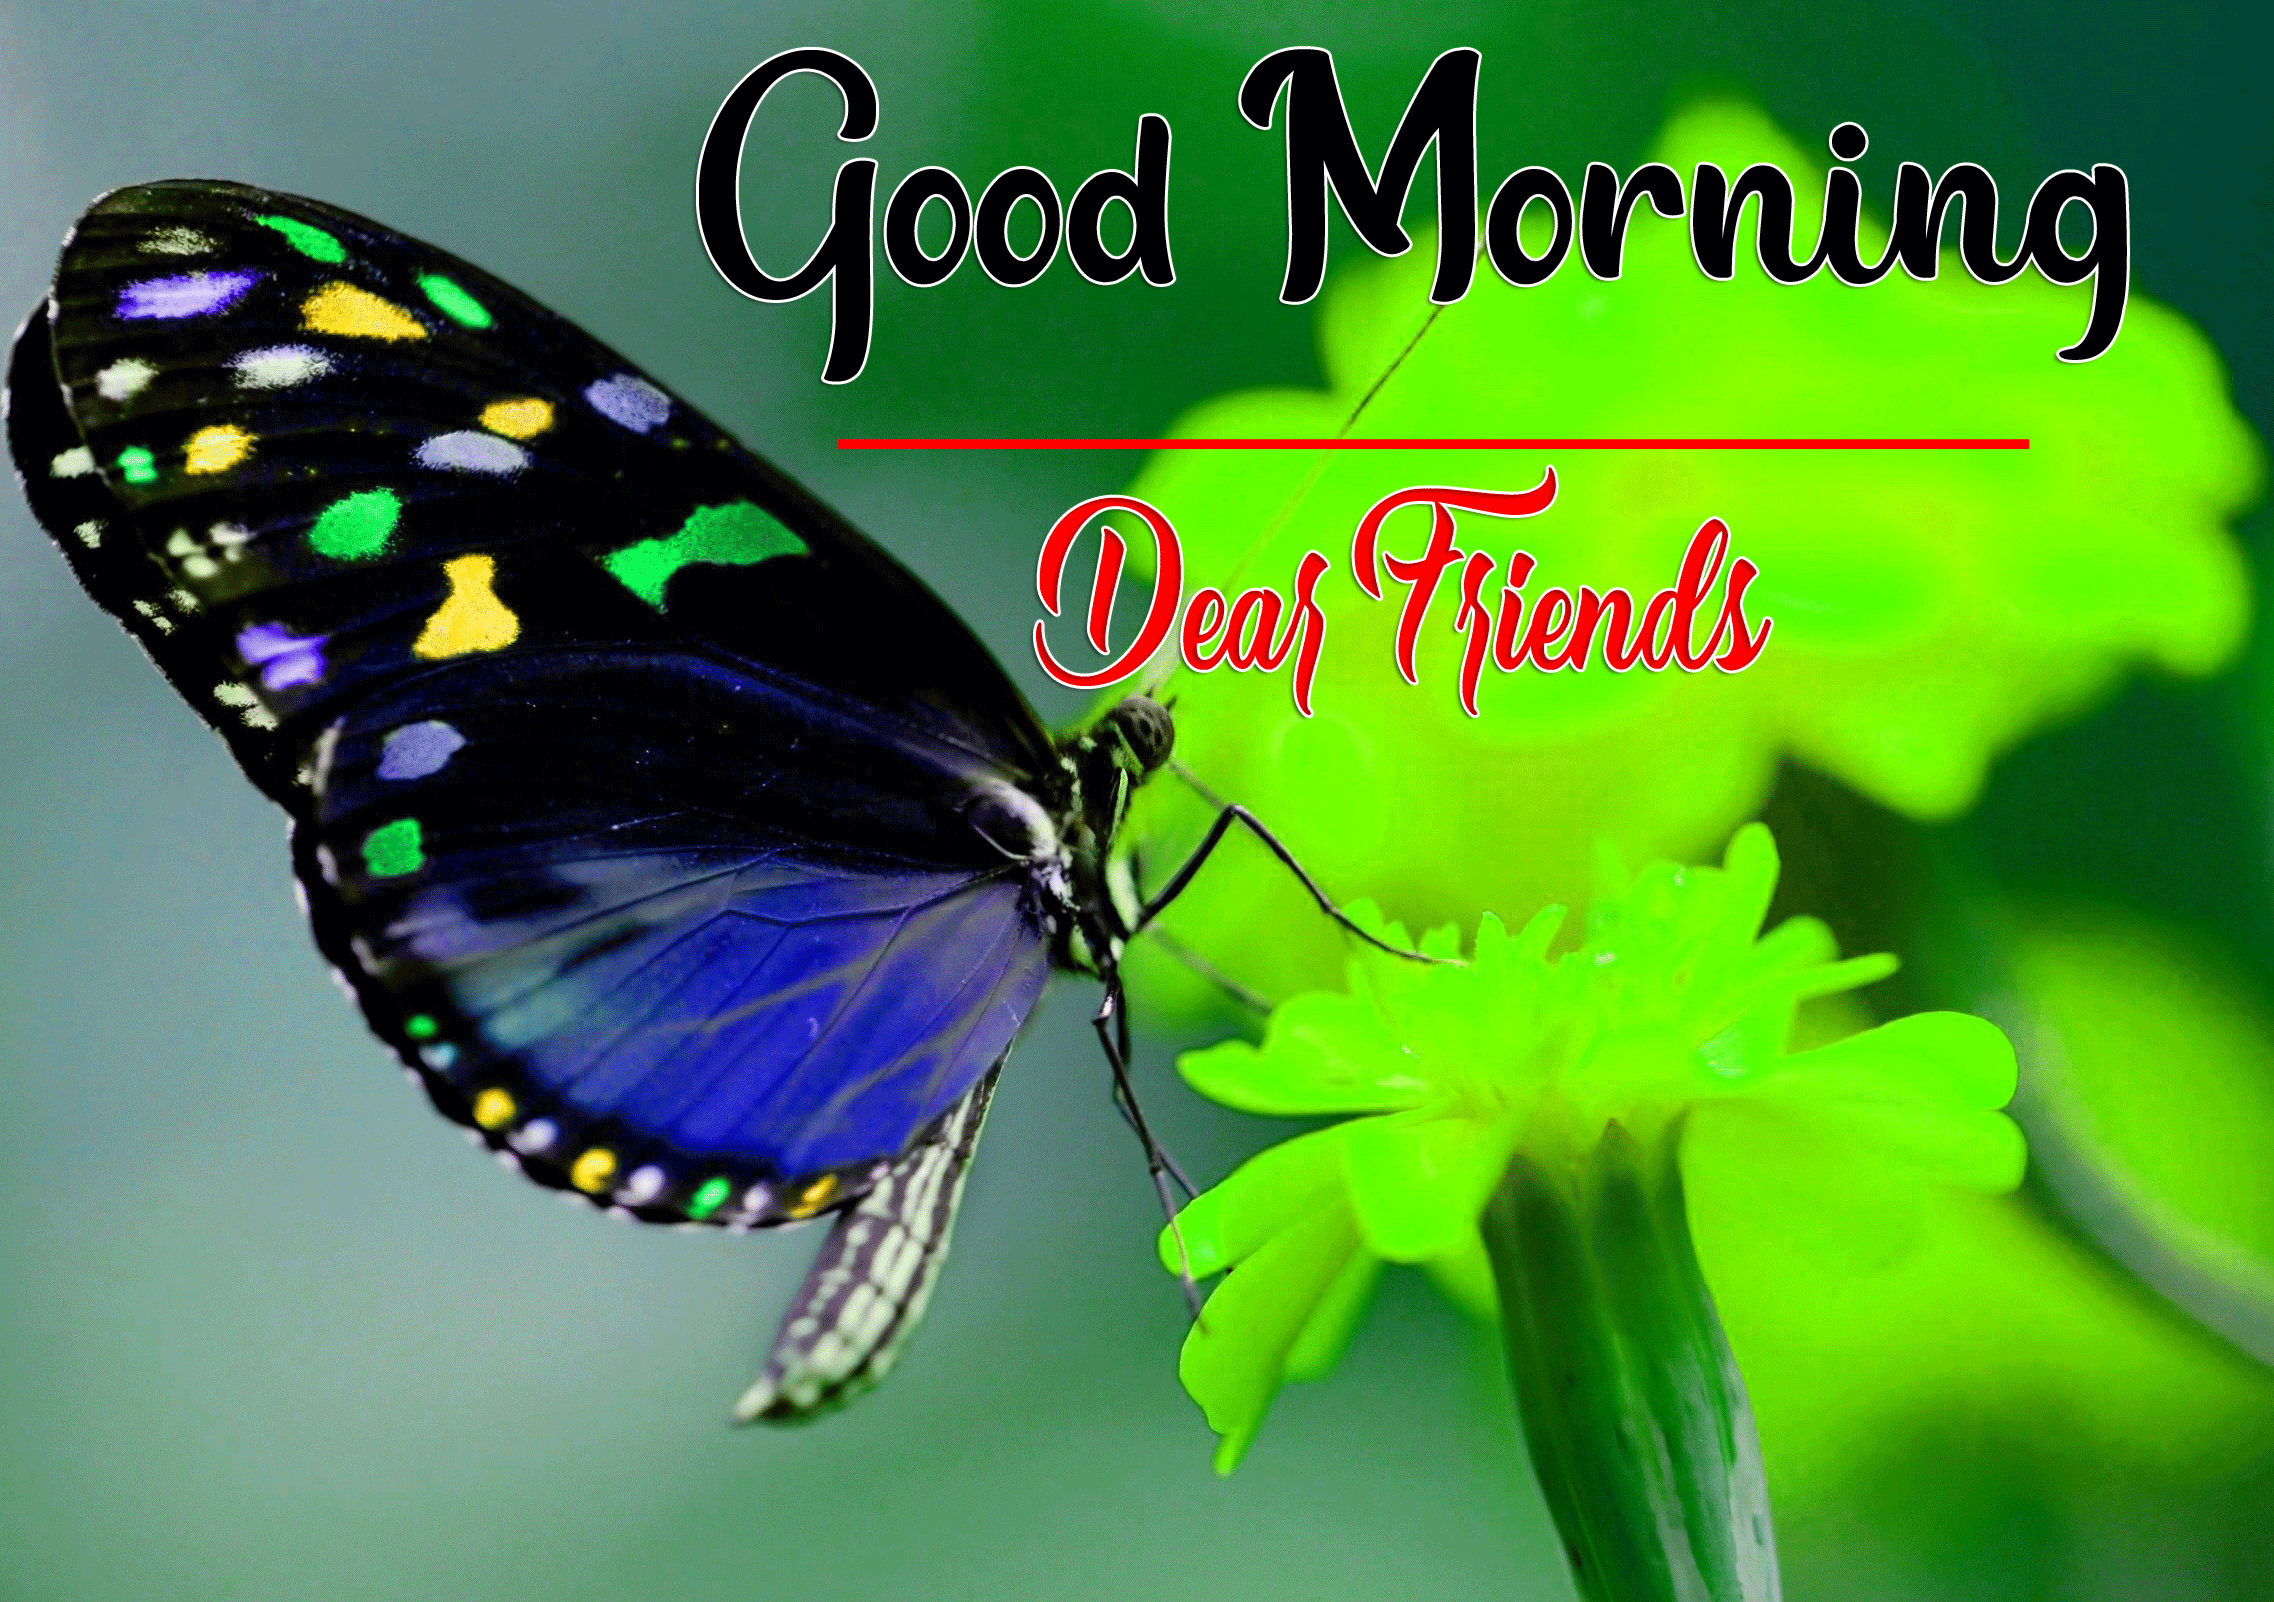 Good Morning Wishes Images HD 1080p 11